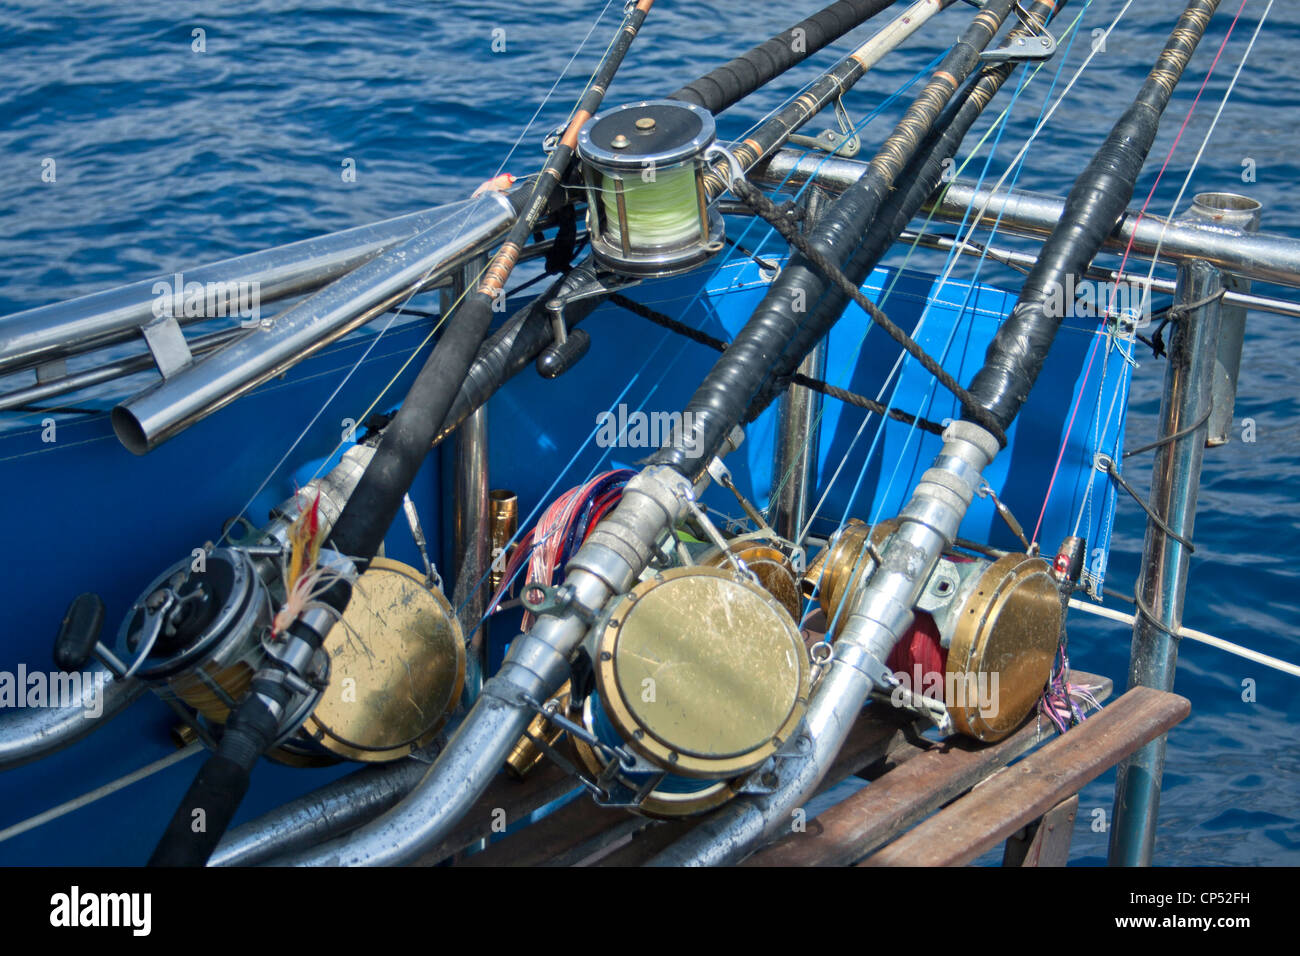 Big game fishing rods photographed during a fishing trip off Tenerife, Canary Islands, Spain. Stock Photo